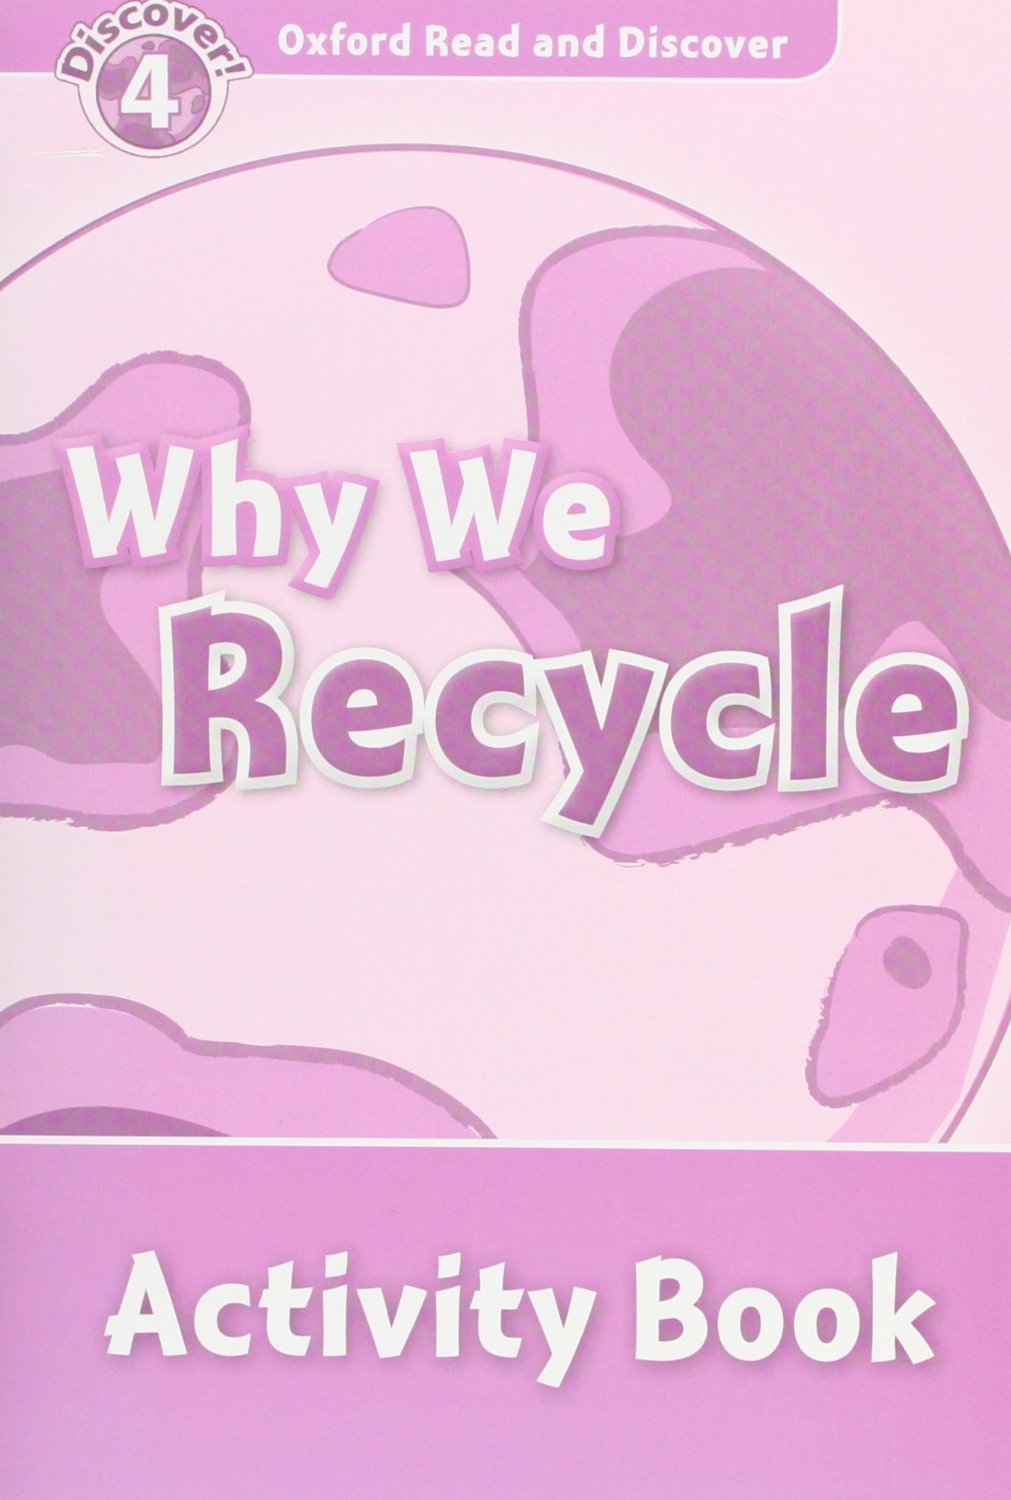 WHY WE RECYCLE (OXFORD READ AND DISCOVER, LEVEL 4) Activity Book